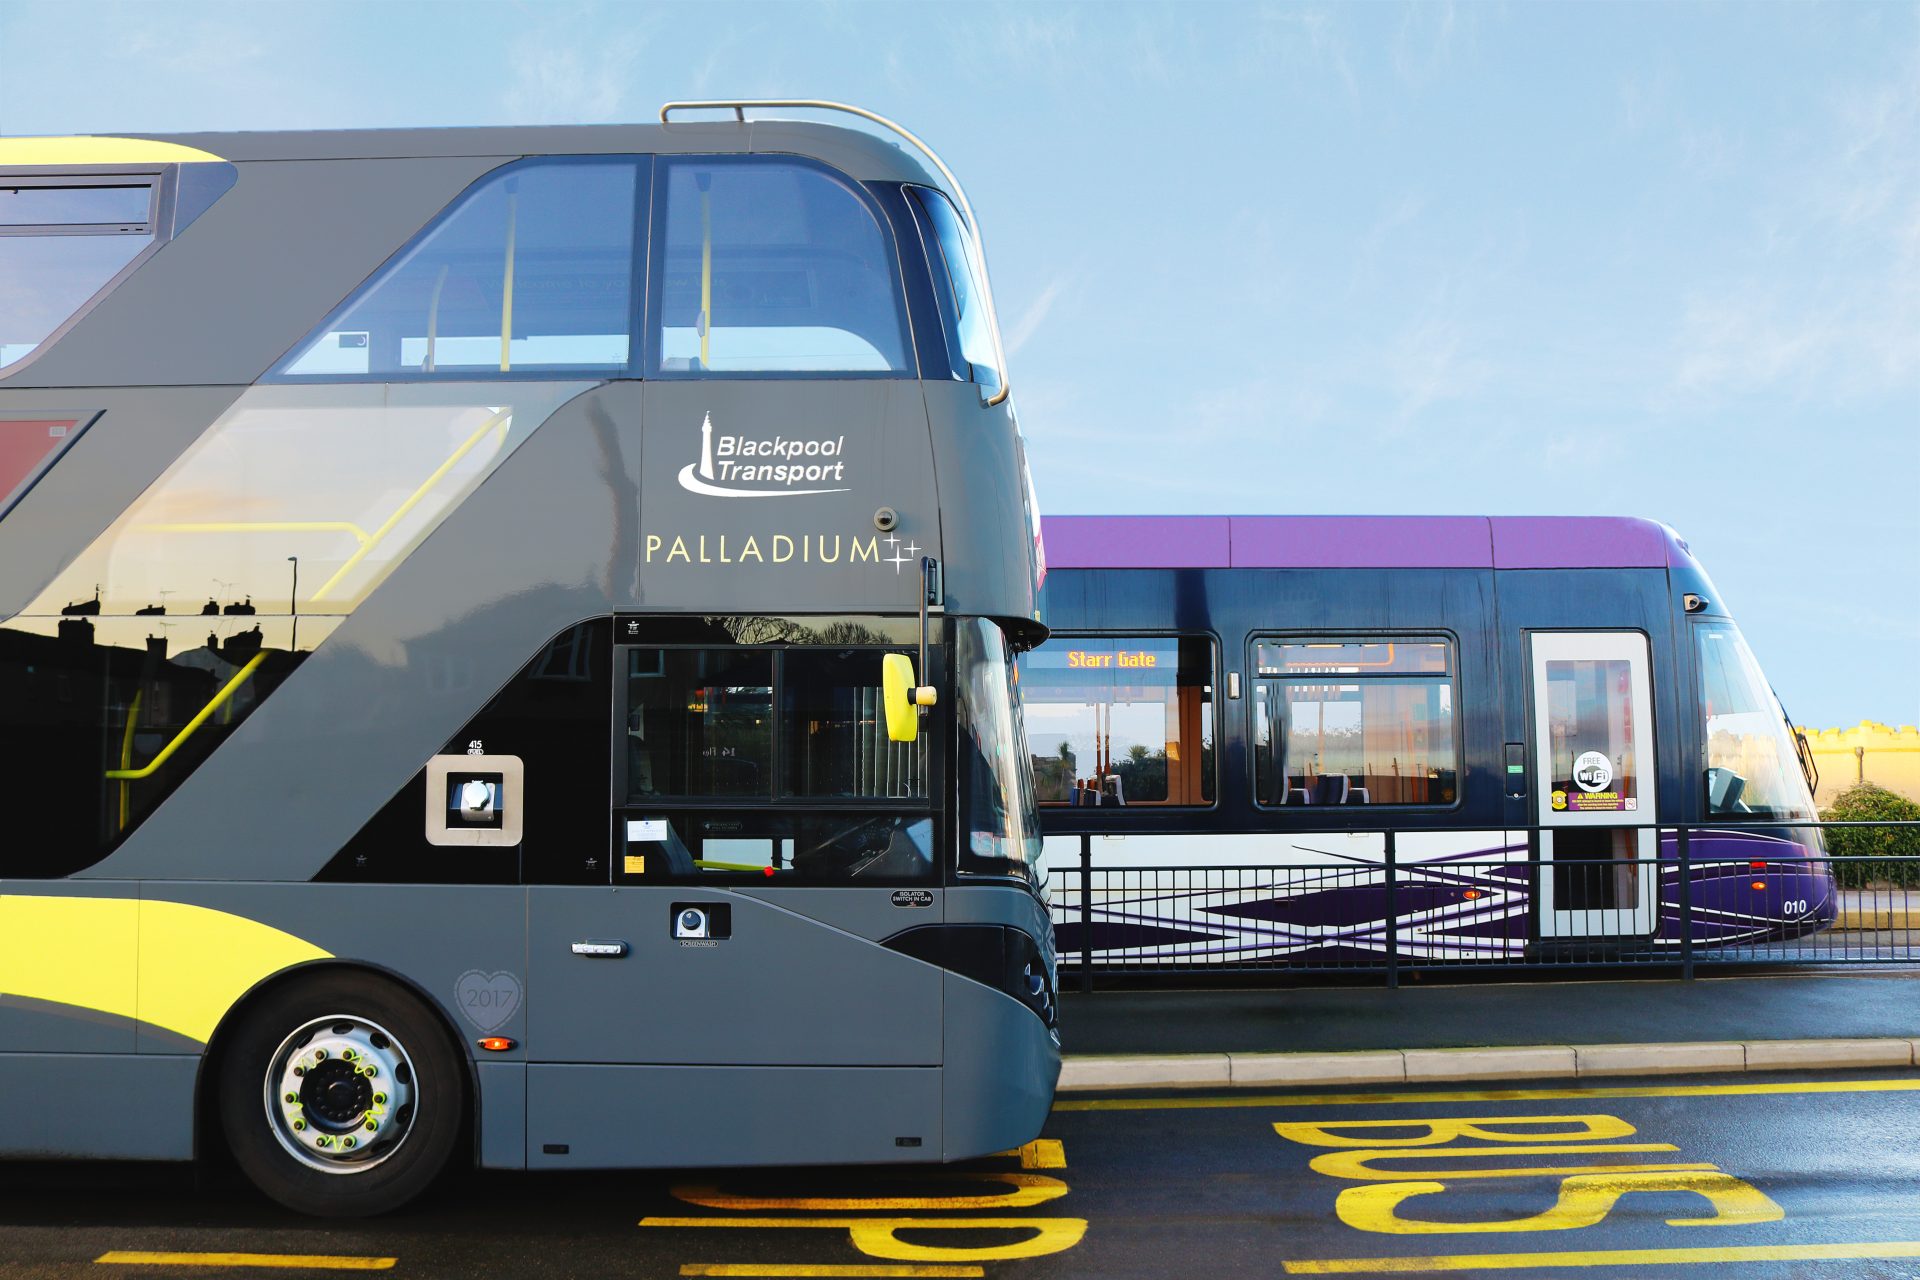 Looking for a new career on the local transport network? Find out more at the Blackpool Transport Recruitment Open Day